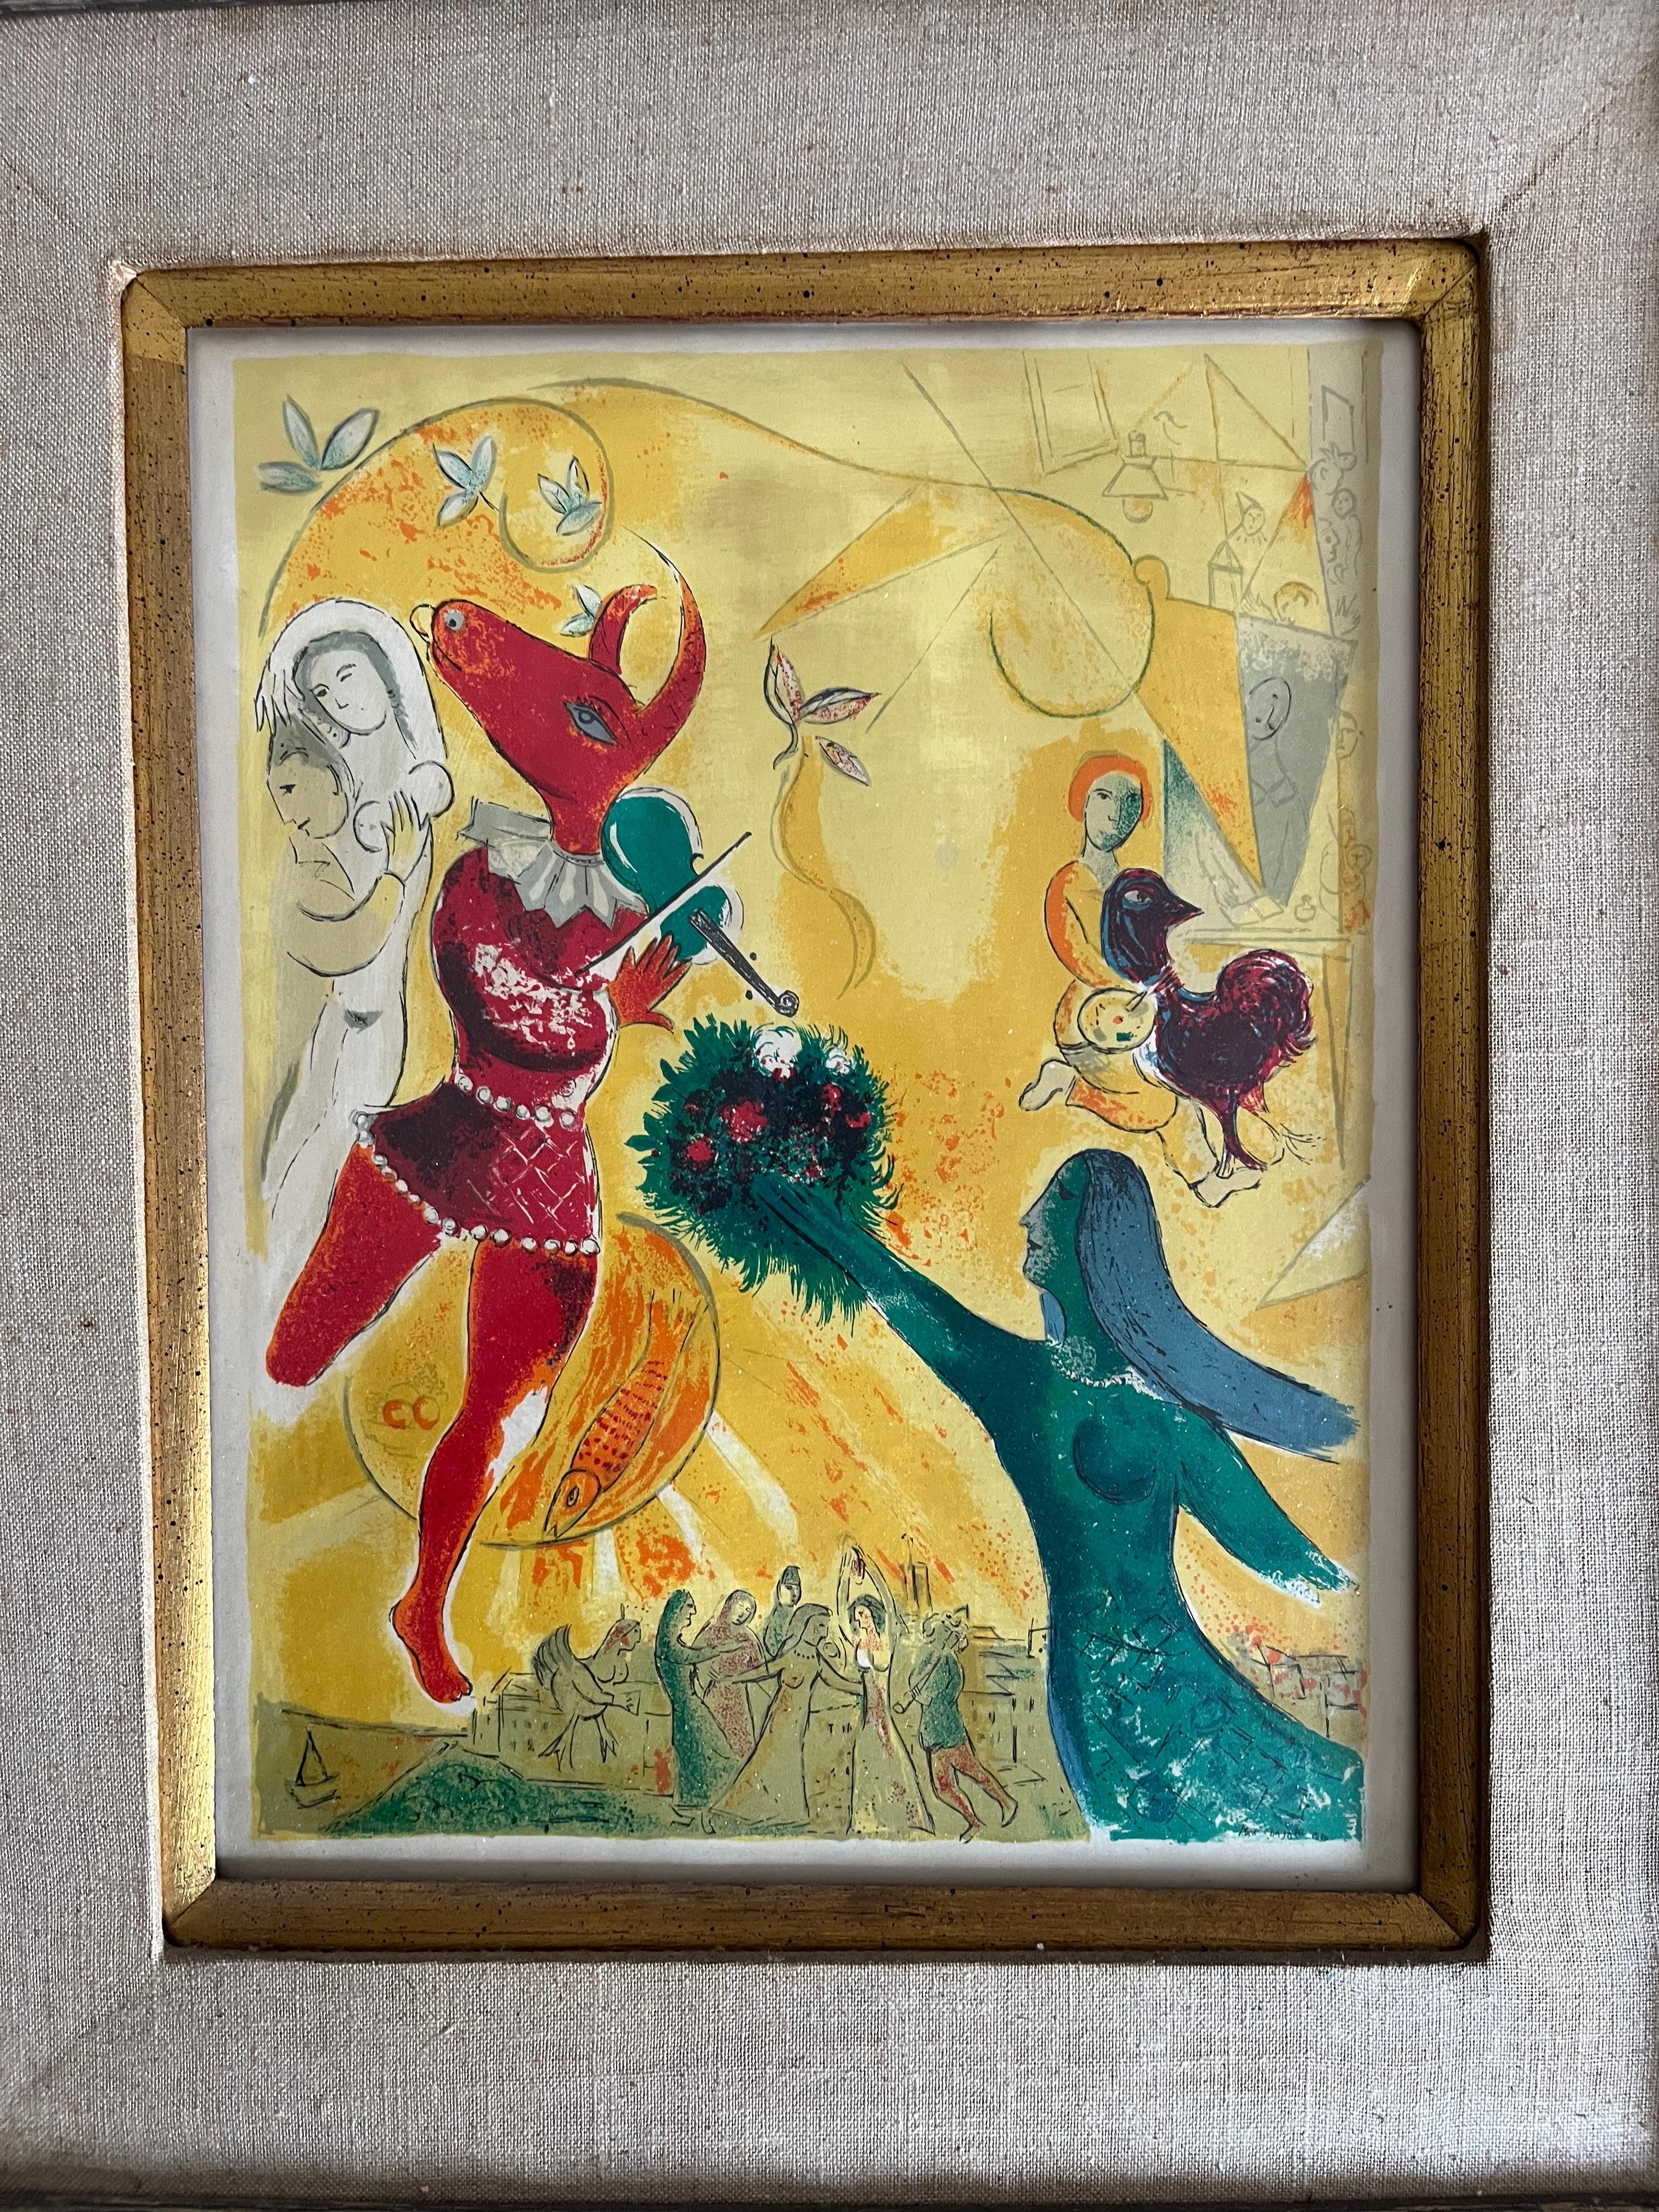 Expressionist Marc Chagall “The Dance” 1950 Litho For Sale